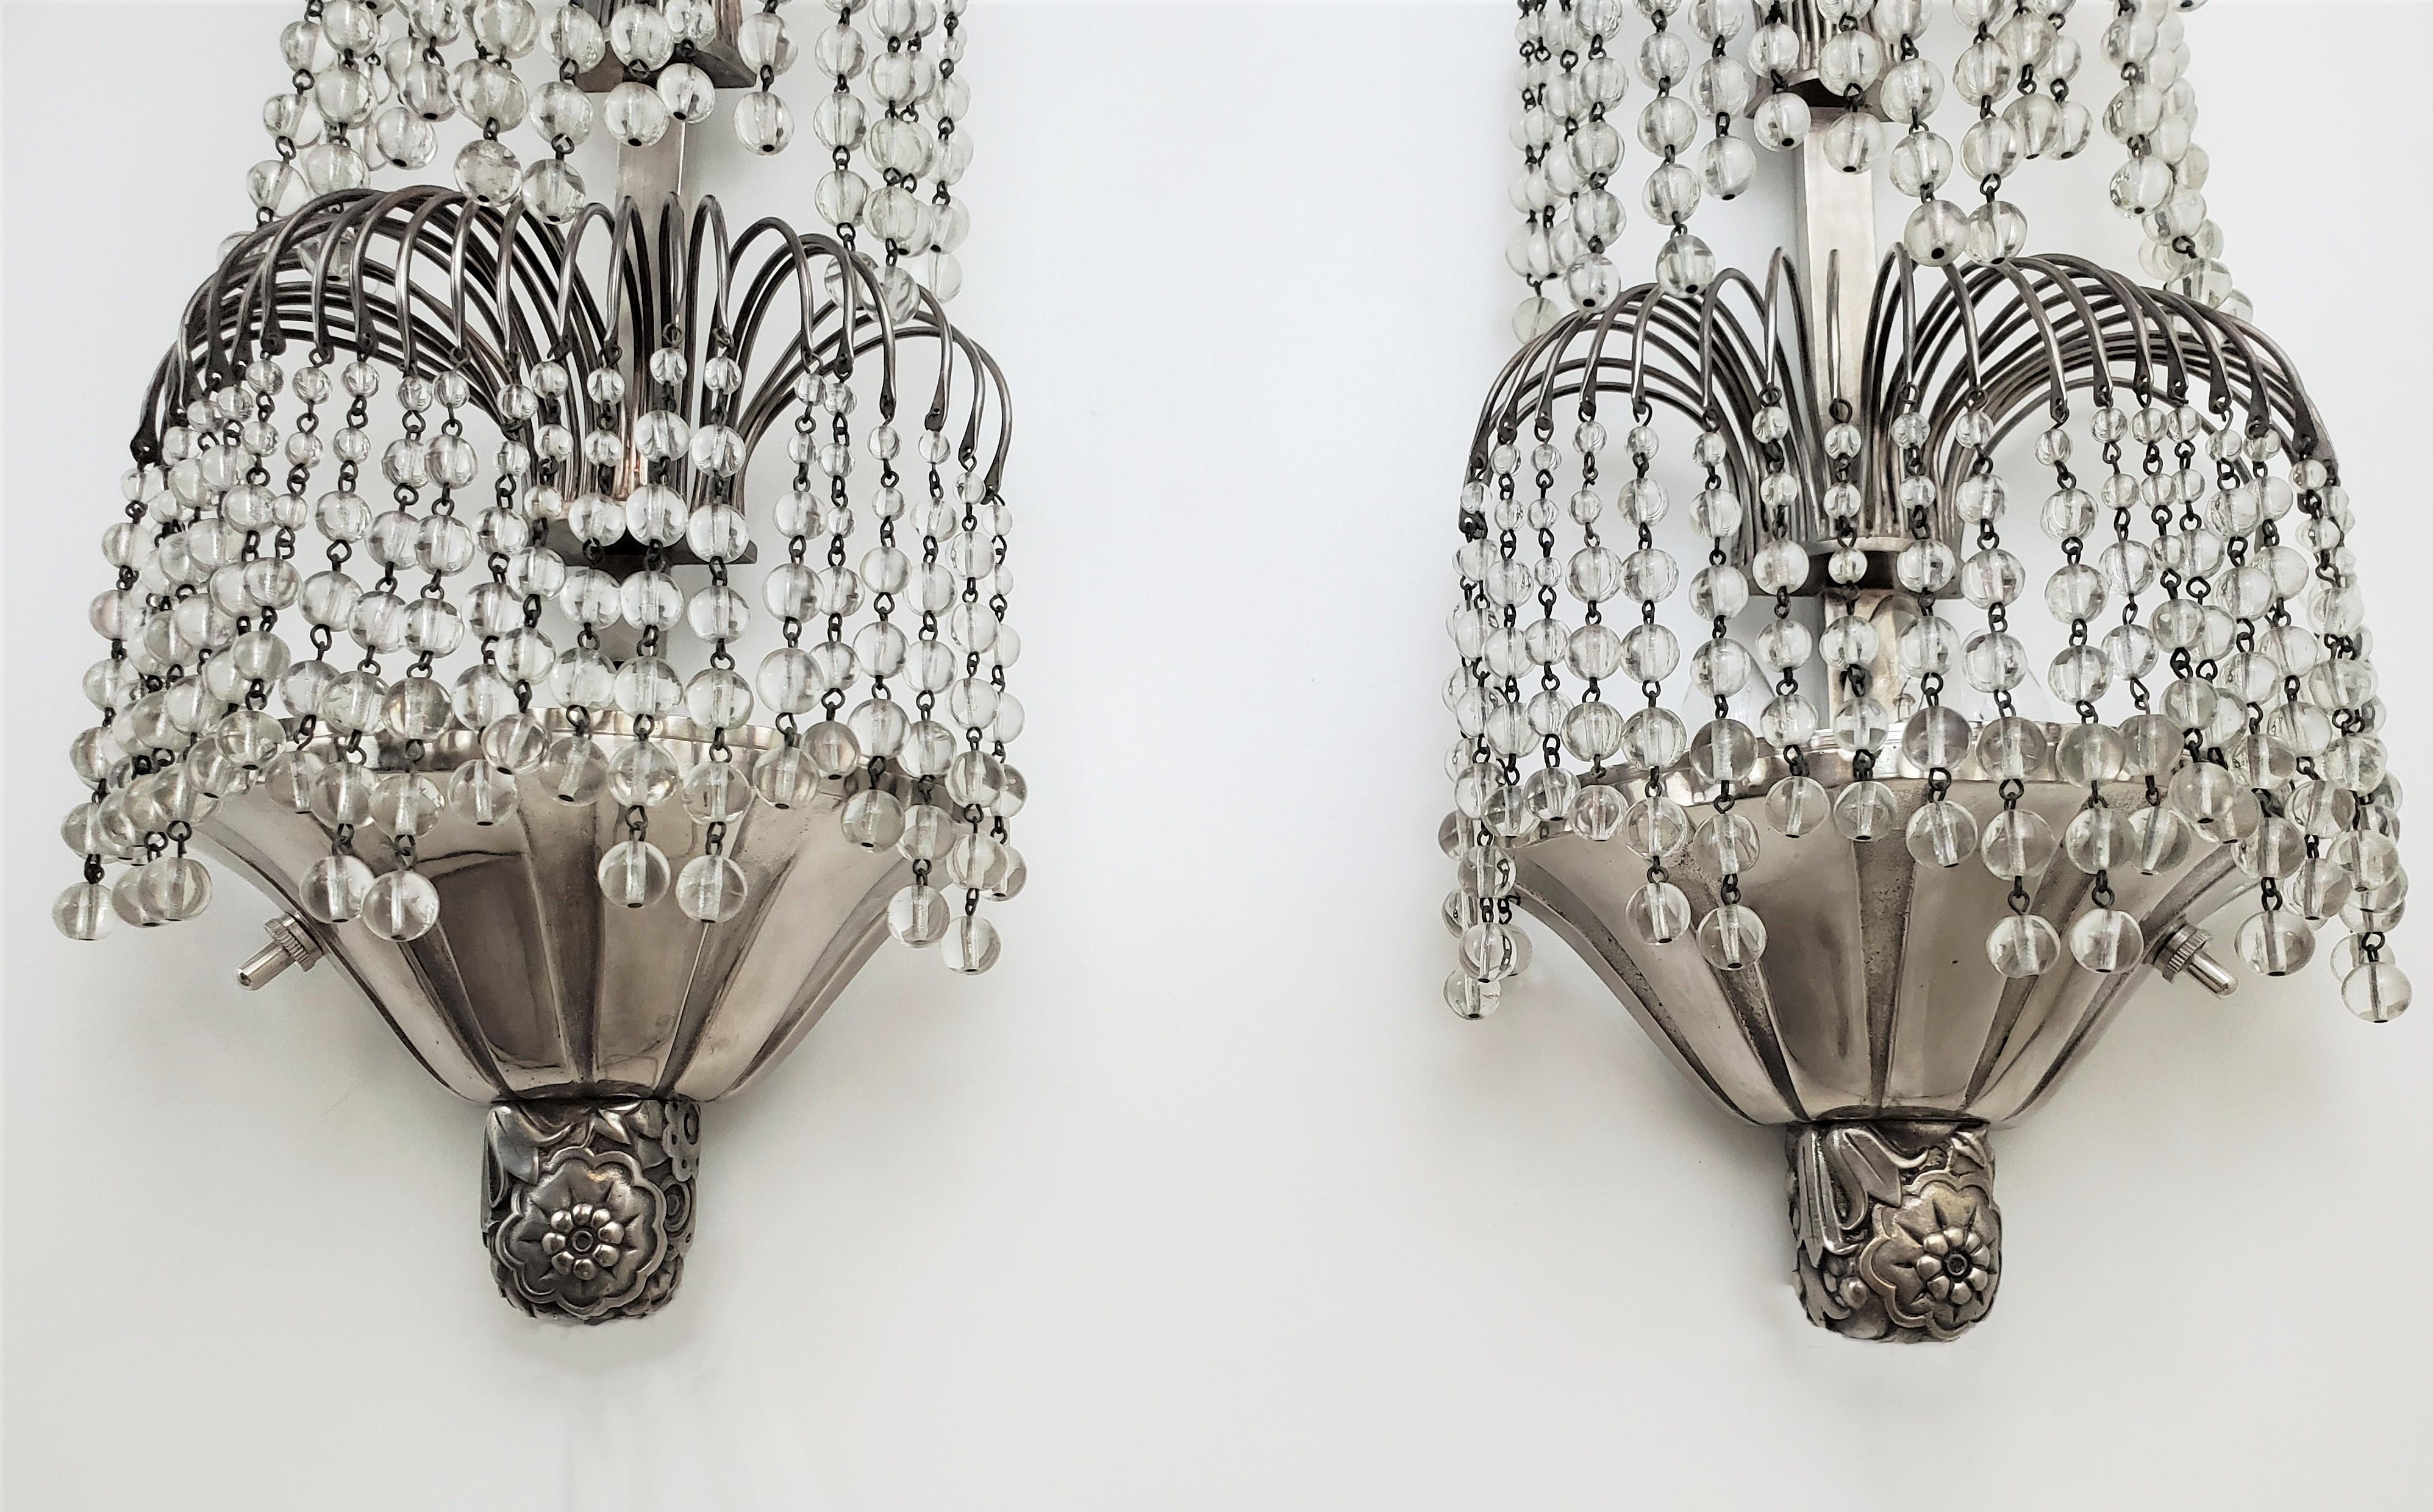 Pair of Tiered Crystal French Art Deco Wall Sconces Attrib to Sue et Mare For Sale 10